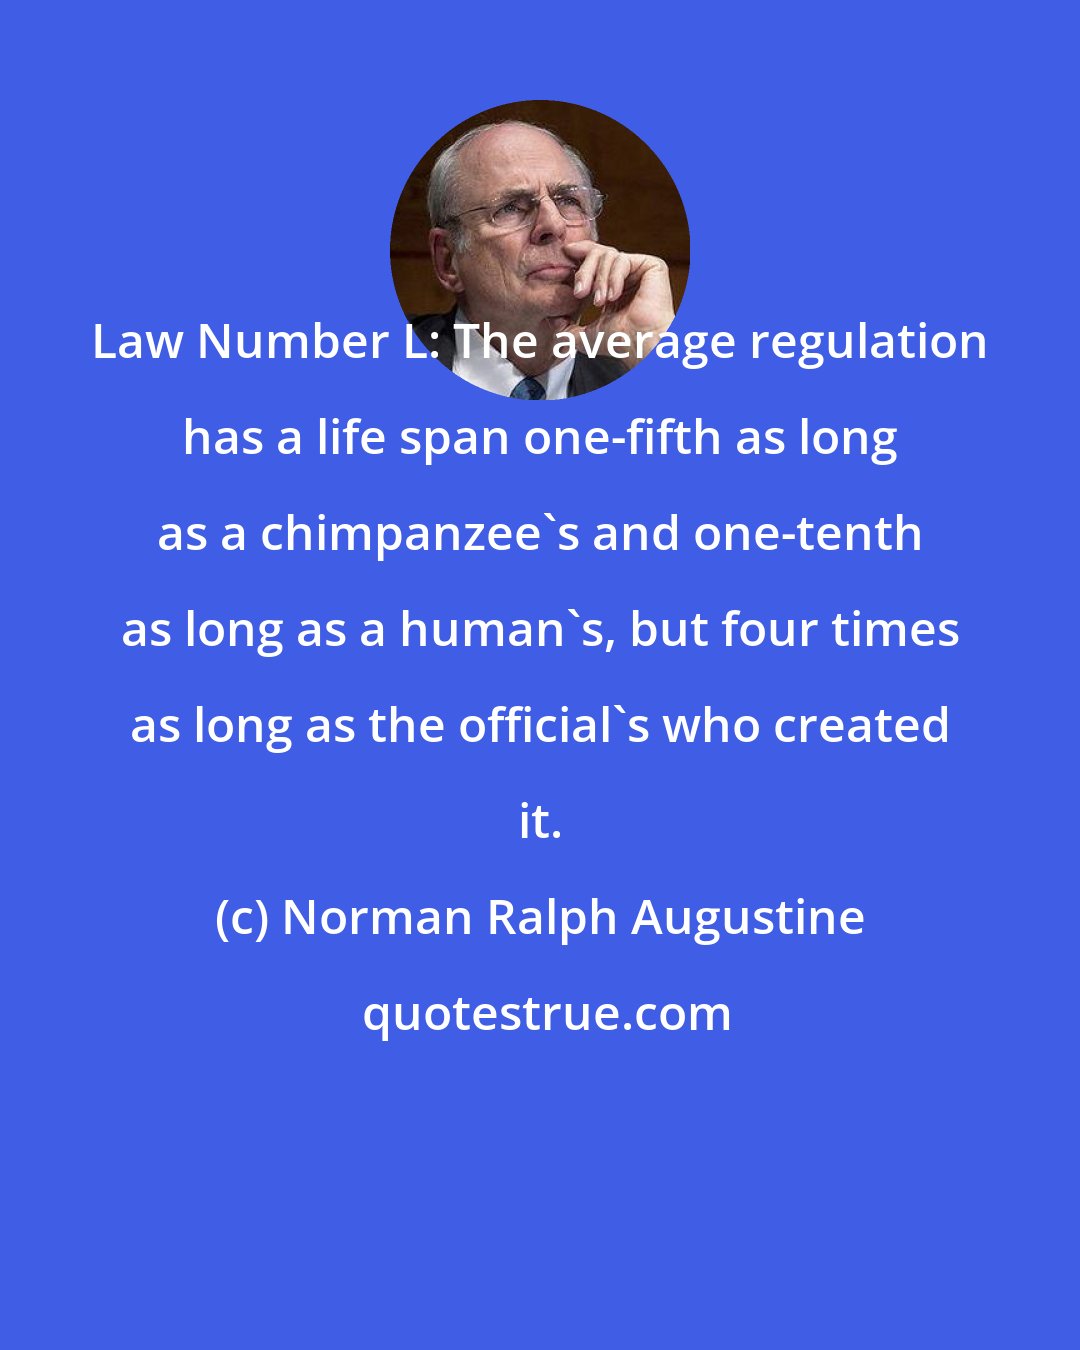 Norman Ralph Augustine: Law Number L: The average regulation has a life span one-fifth as long as a chimpanzee's and one-tenth as long as a human's, but four times as long as the official's who created it.